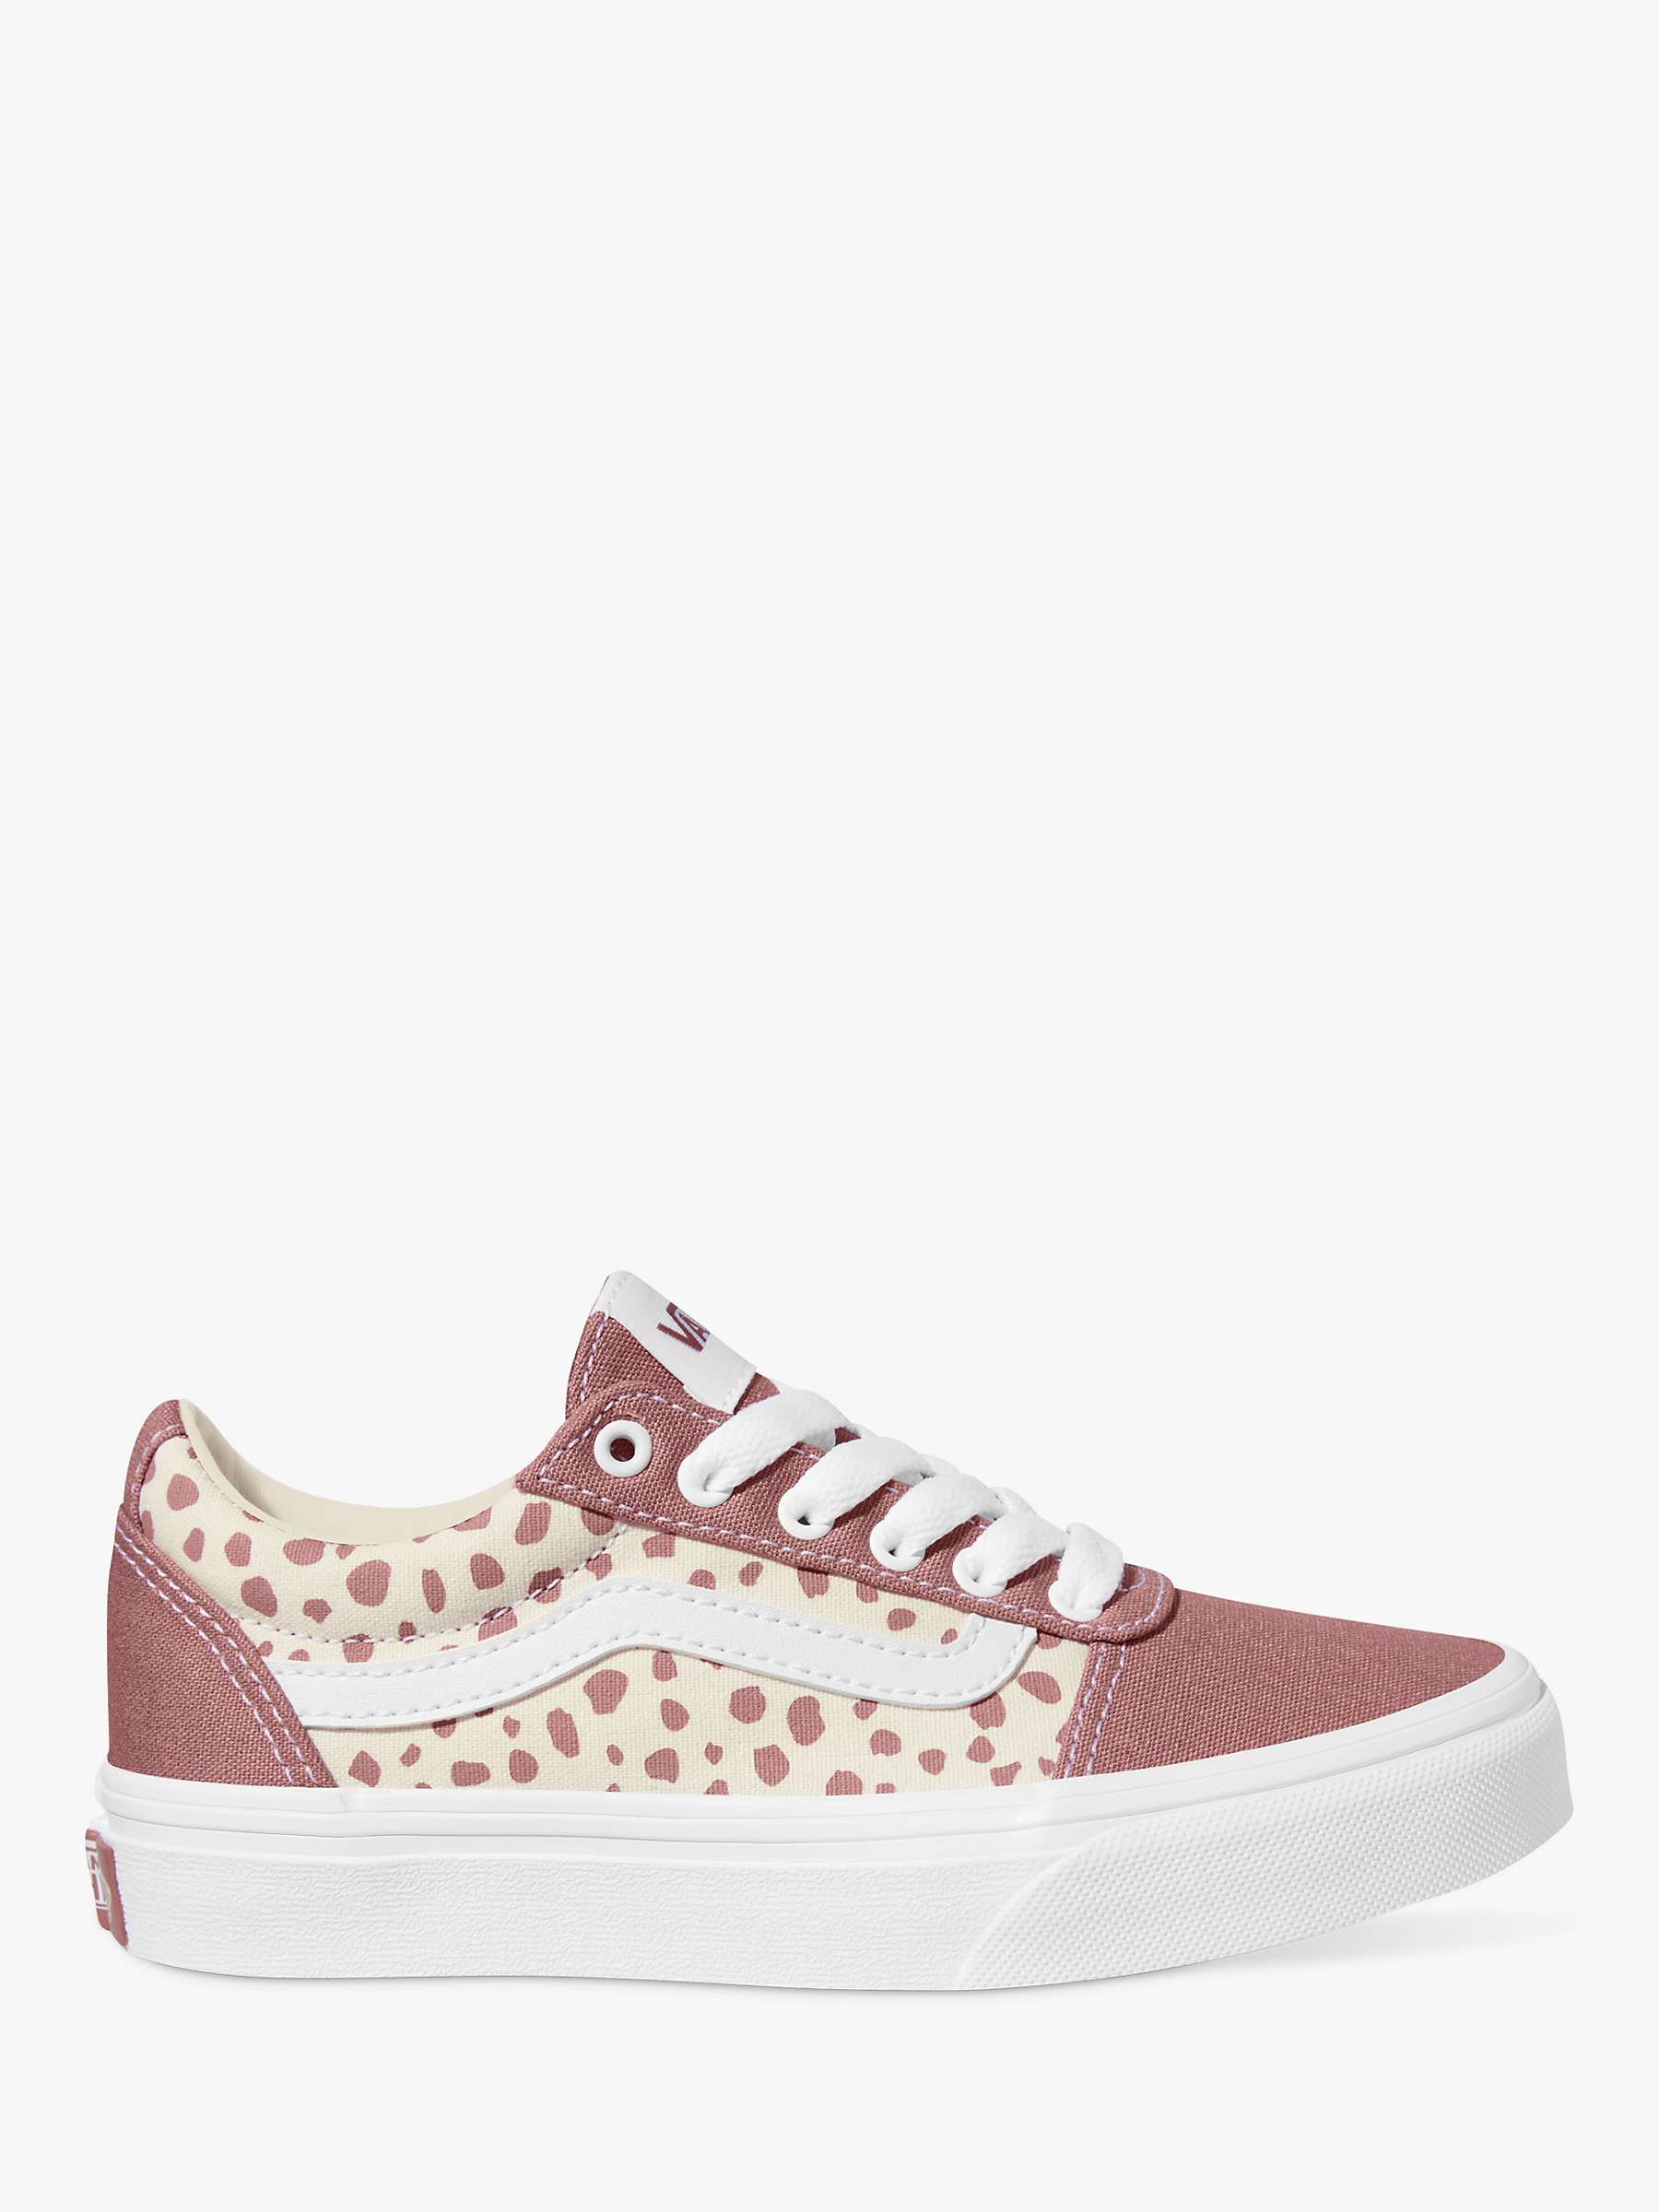 Buy Vans Kids' Ward Dots Trainers, Withered Rose Online at johnlewis.com